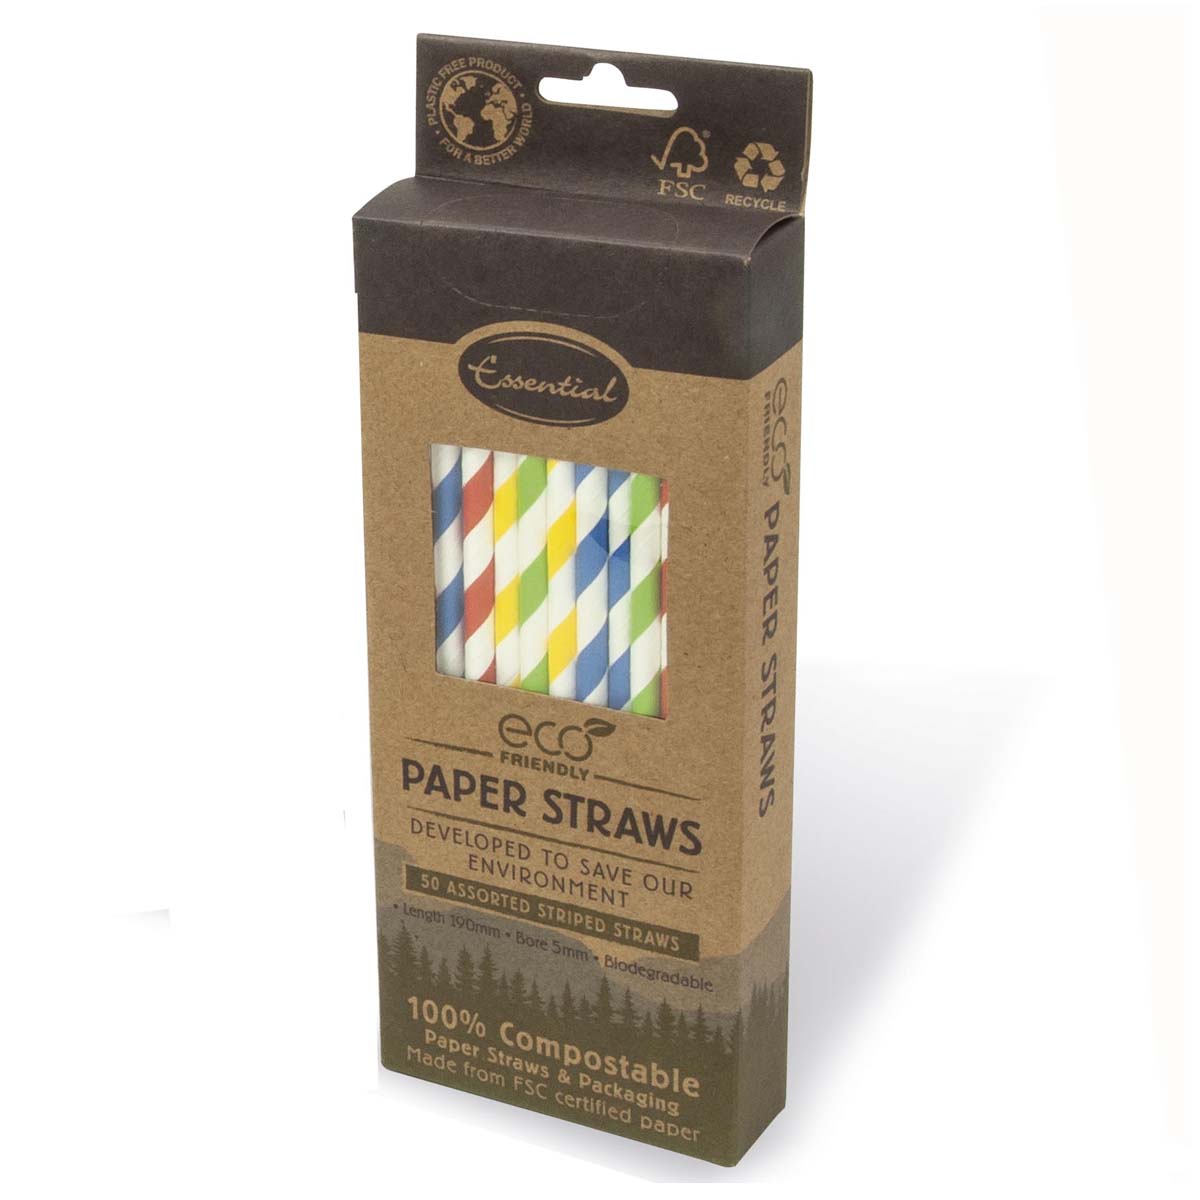 Essential - Eco Friendly Paper Straws - 50 pcs - Continental Food Store